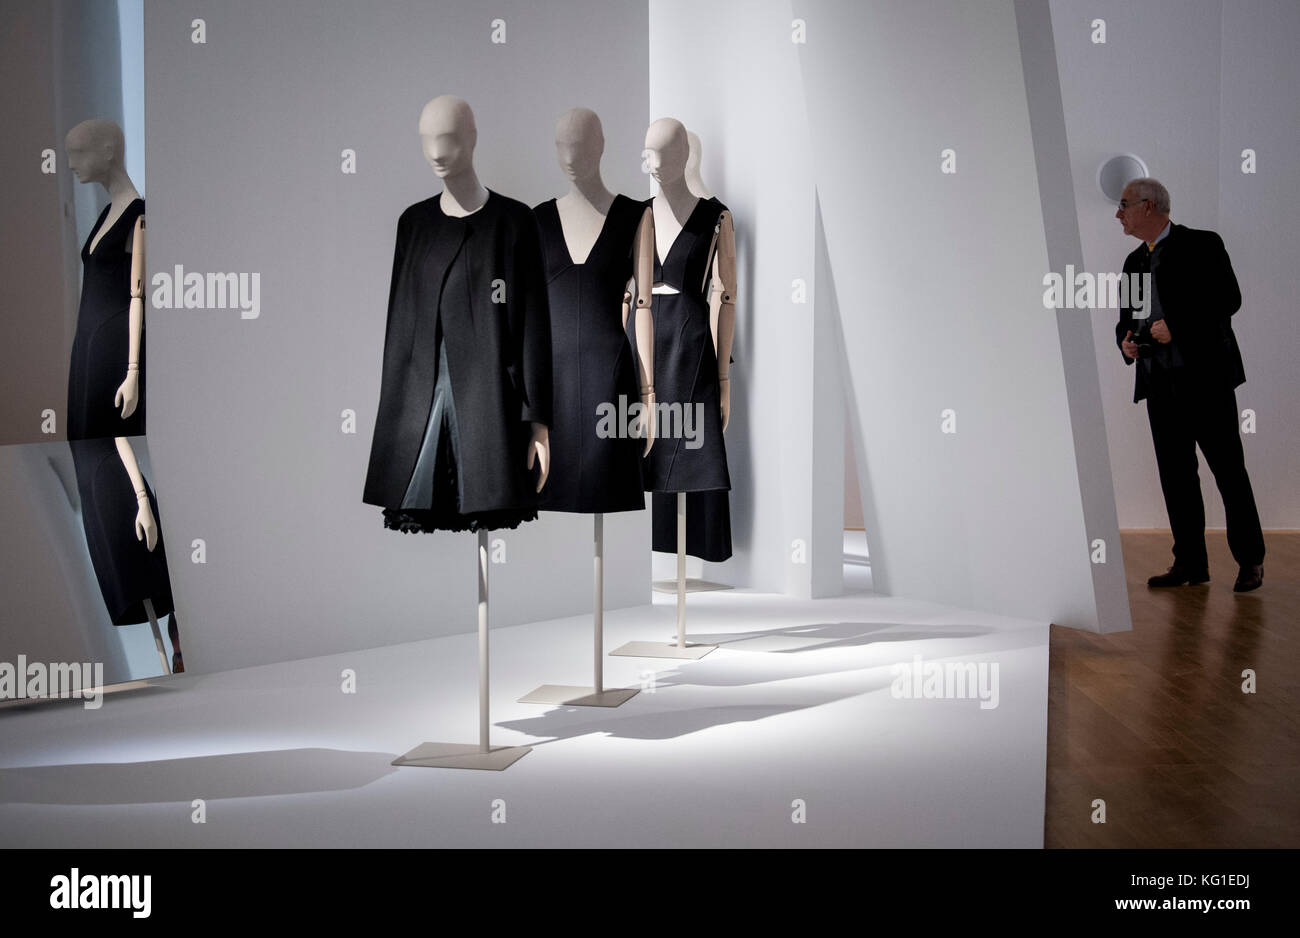 A man standing in front of the exhibits in the exhibition "Jil Stock Photo  - Alamy